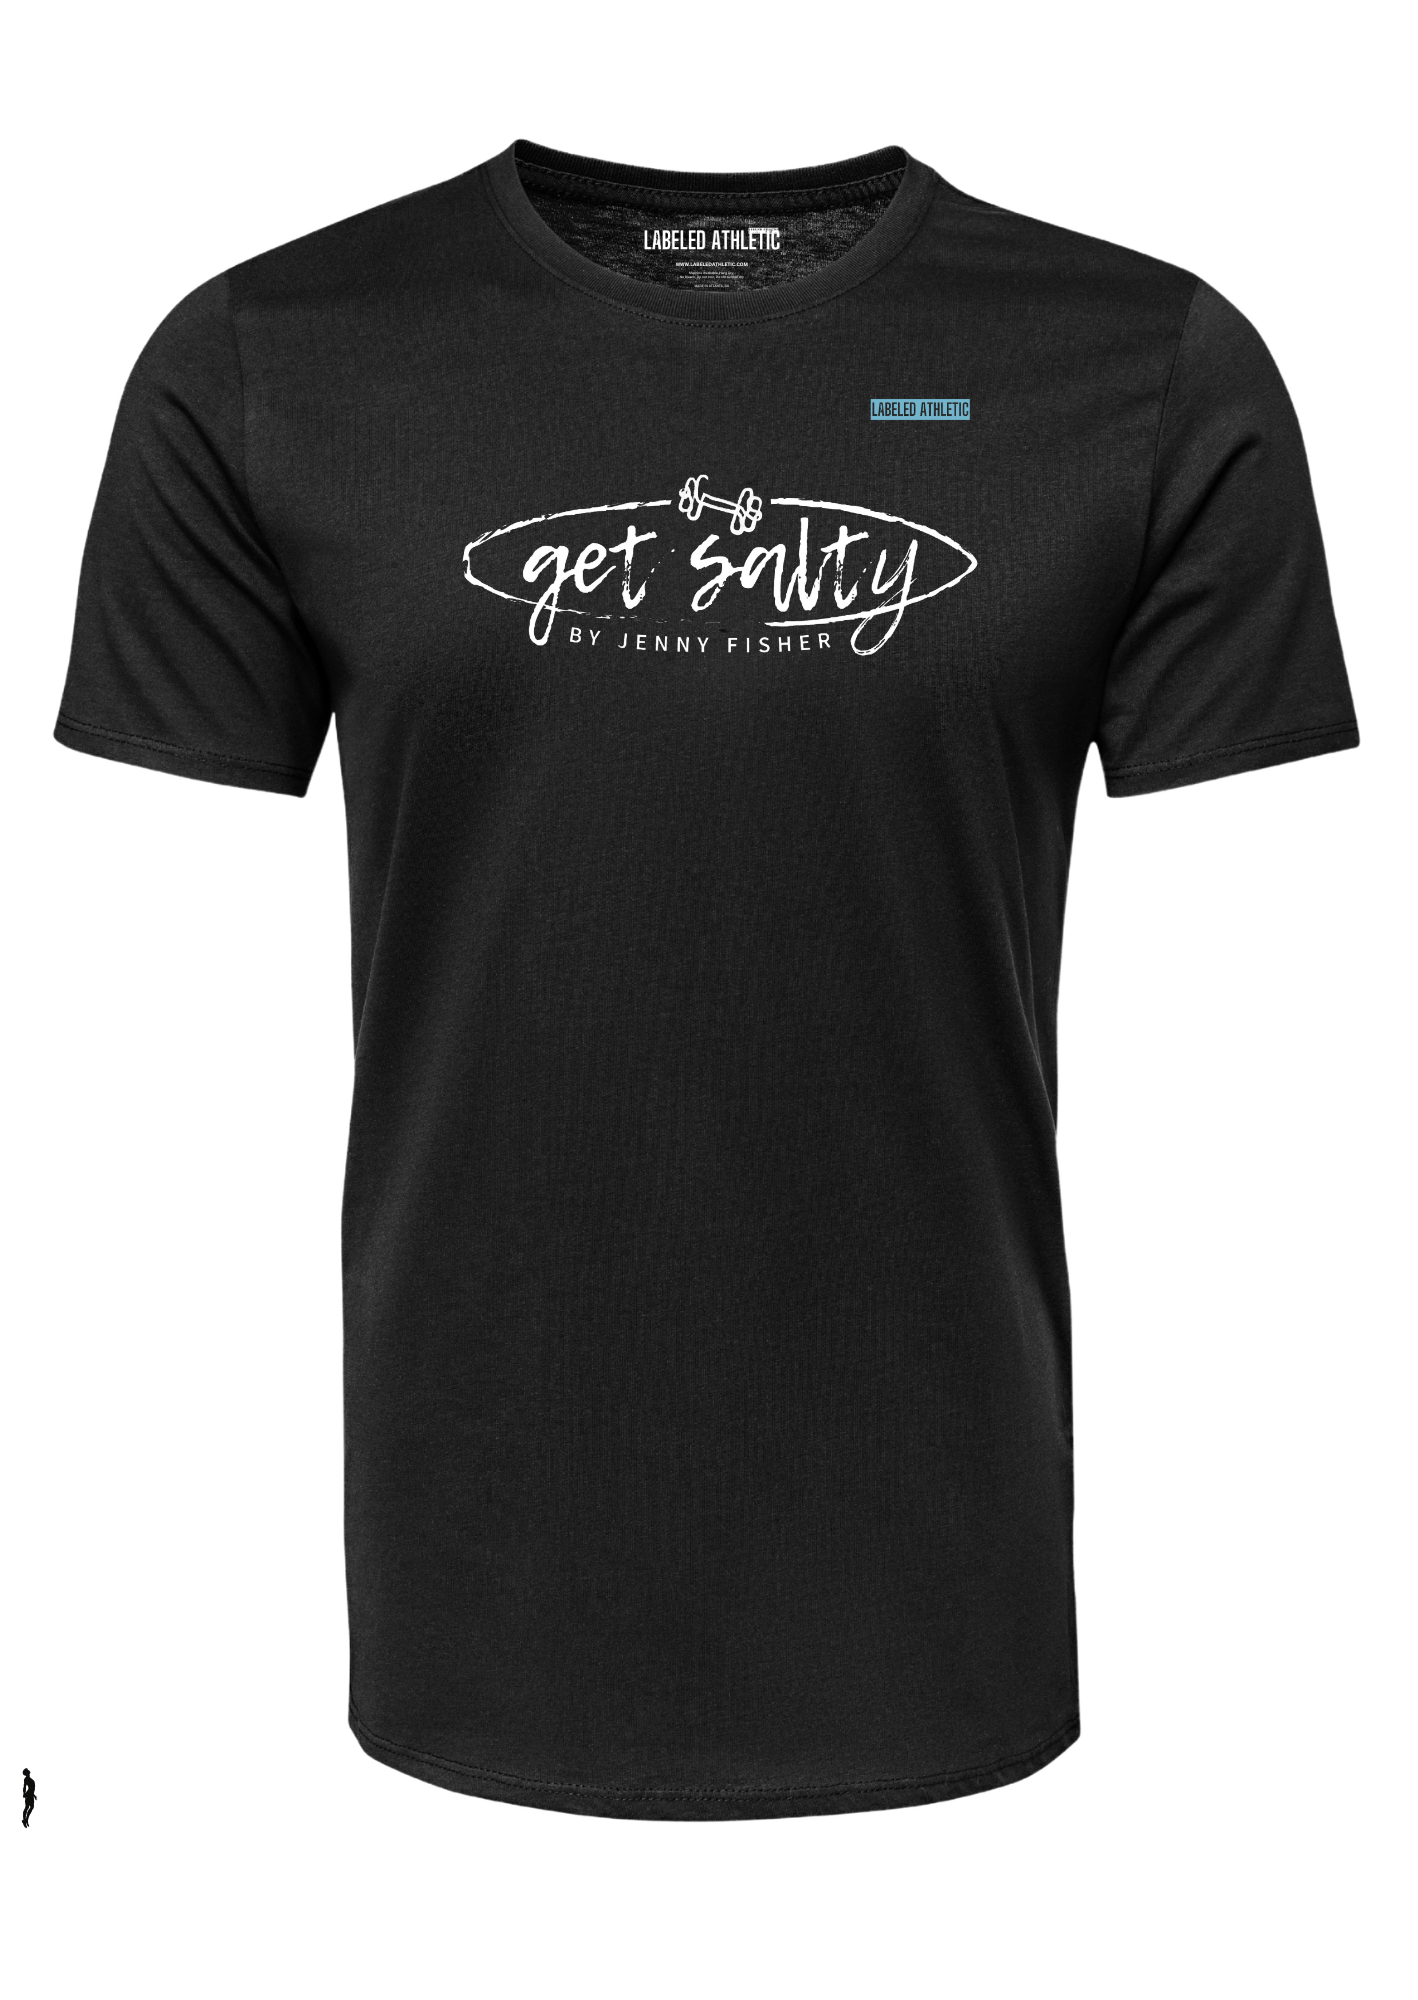 GET SALTY by Jenny Fisher - LABELED ATHLETIC T-SHIRT | BLACK/WHITE/TEAL